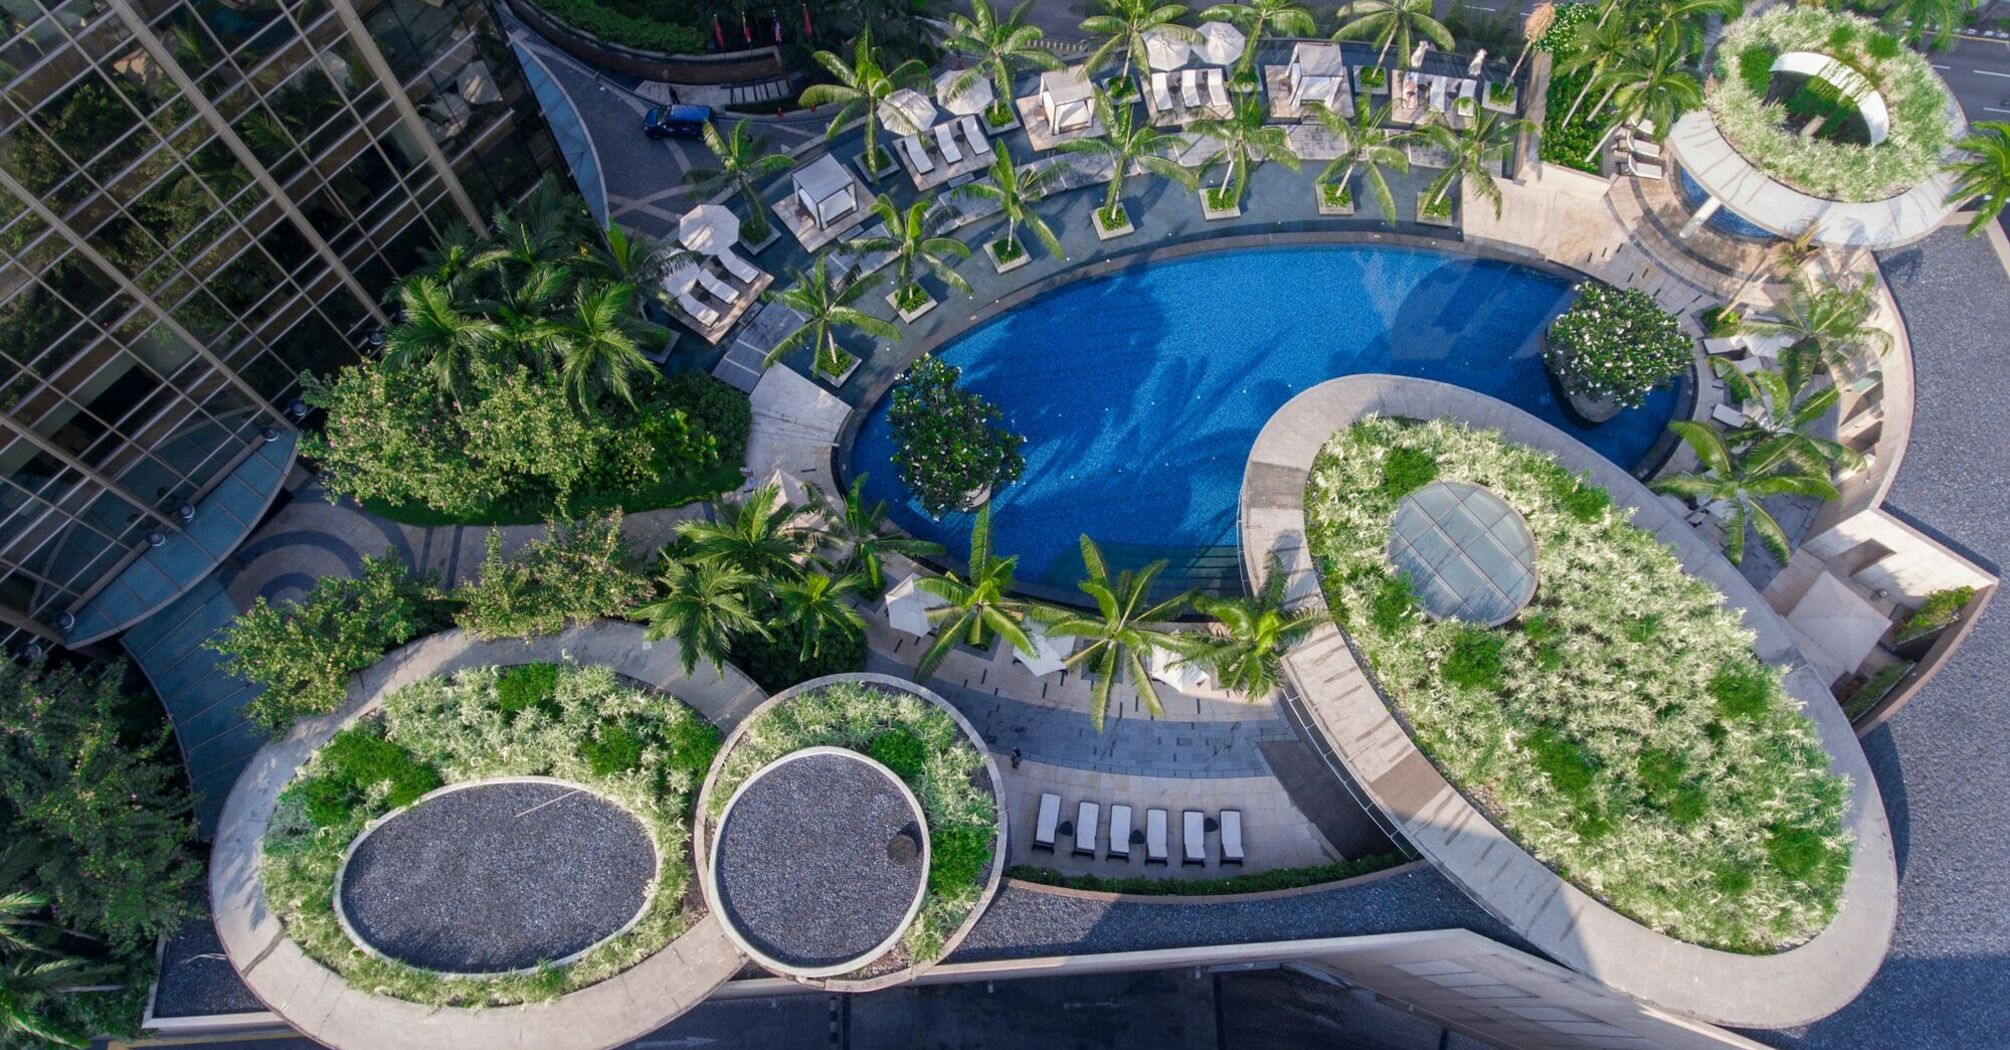 Overhead view of the luxurious pool area at Grand Hyatt Kuala Lumpur surrounded by lush greenery and modern architecture